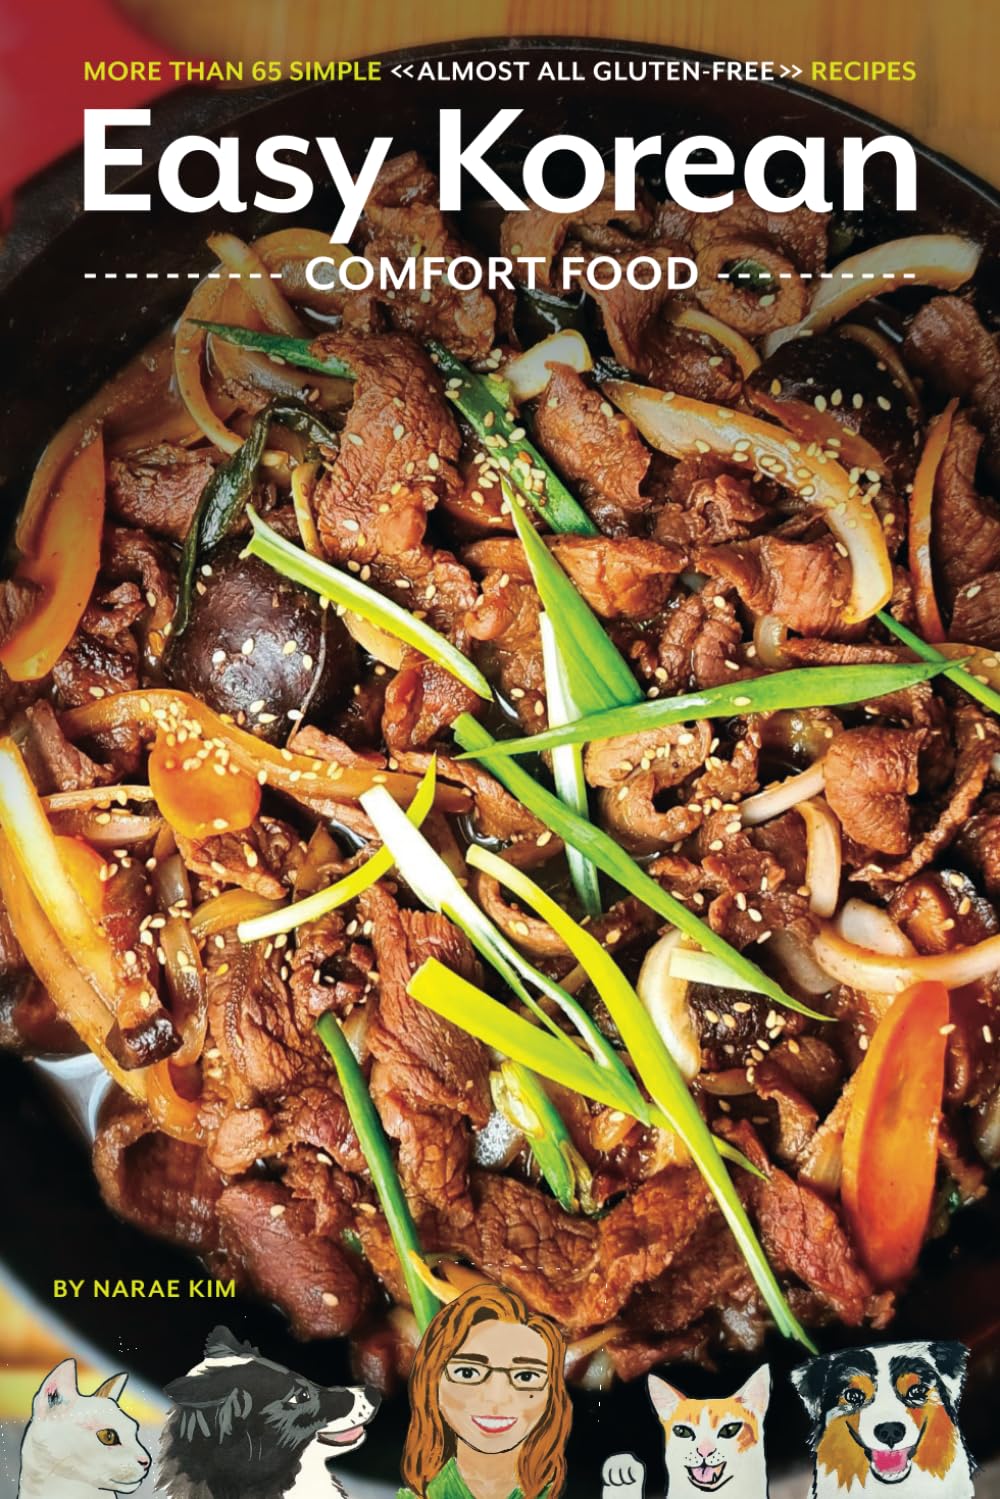 Easy Korean Comfort Food: More than 65 Simple - Almost All Gluten-Free - Recipes